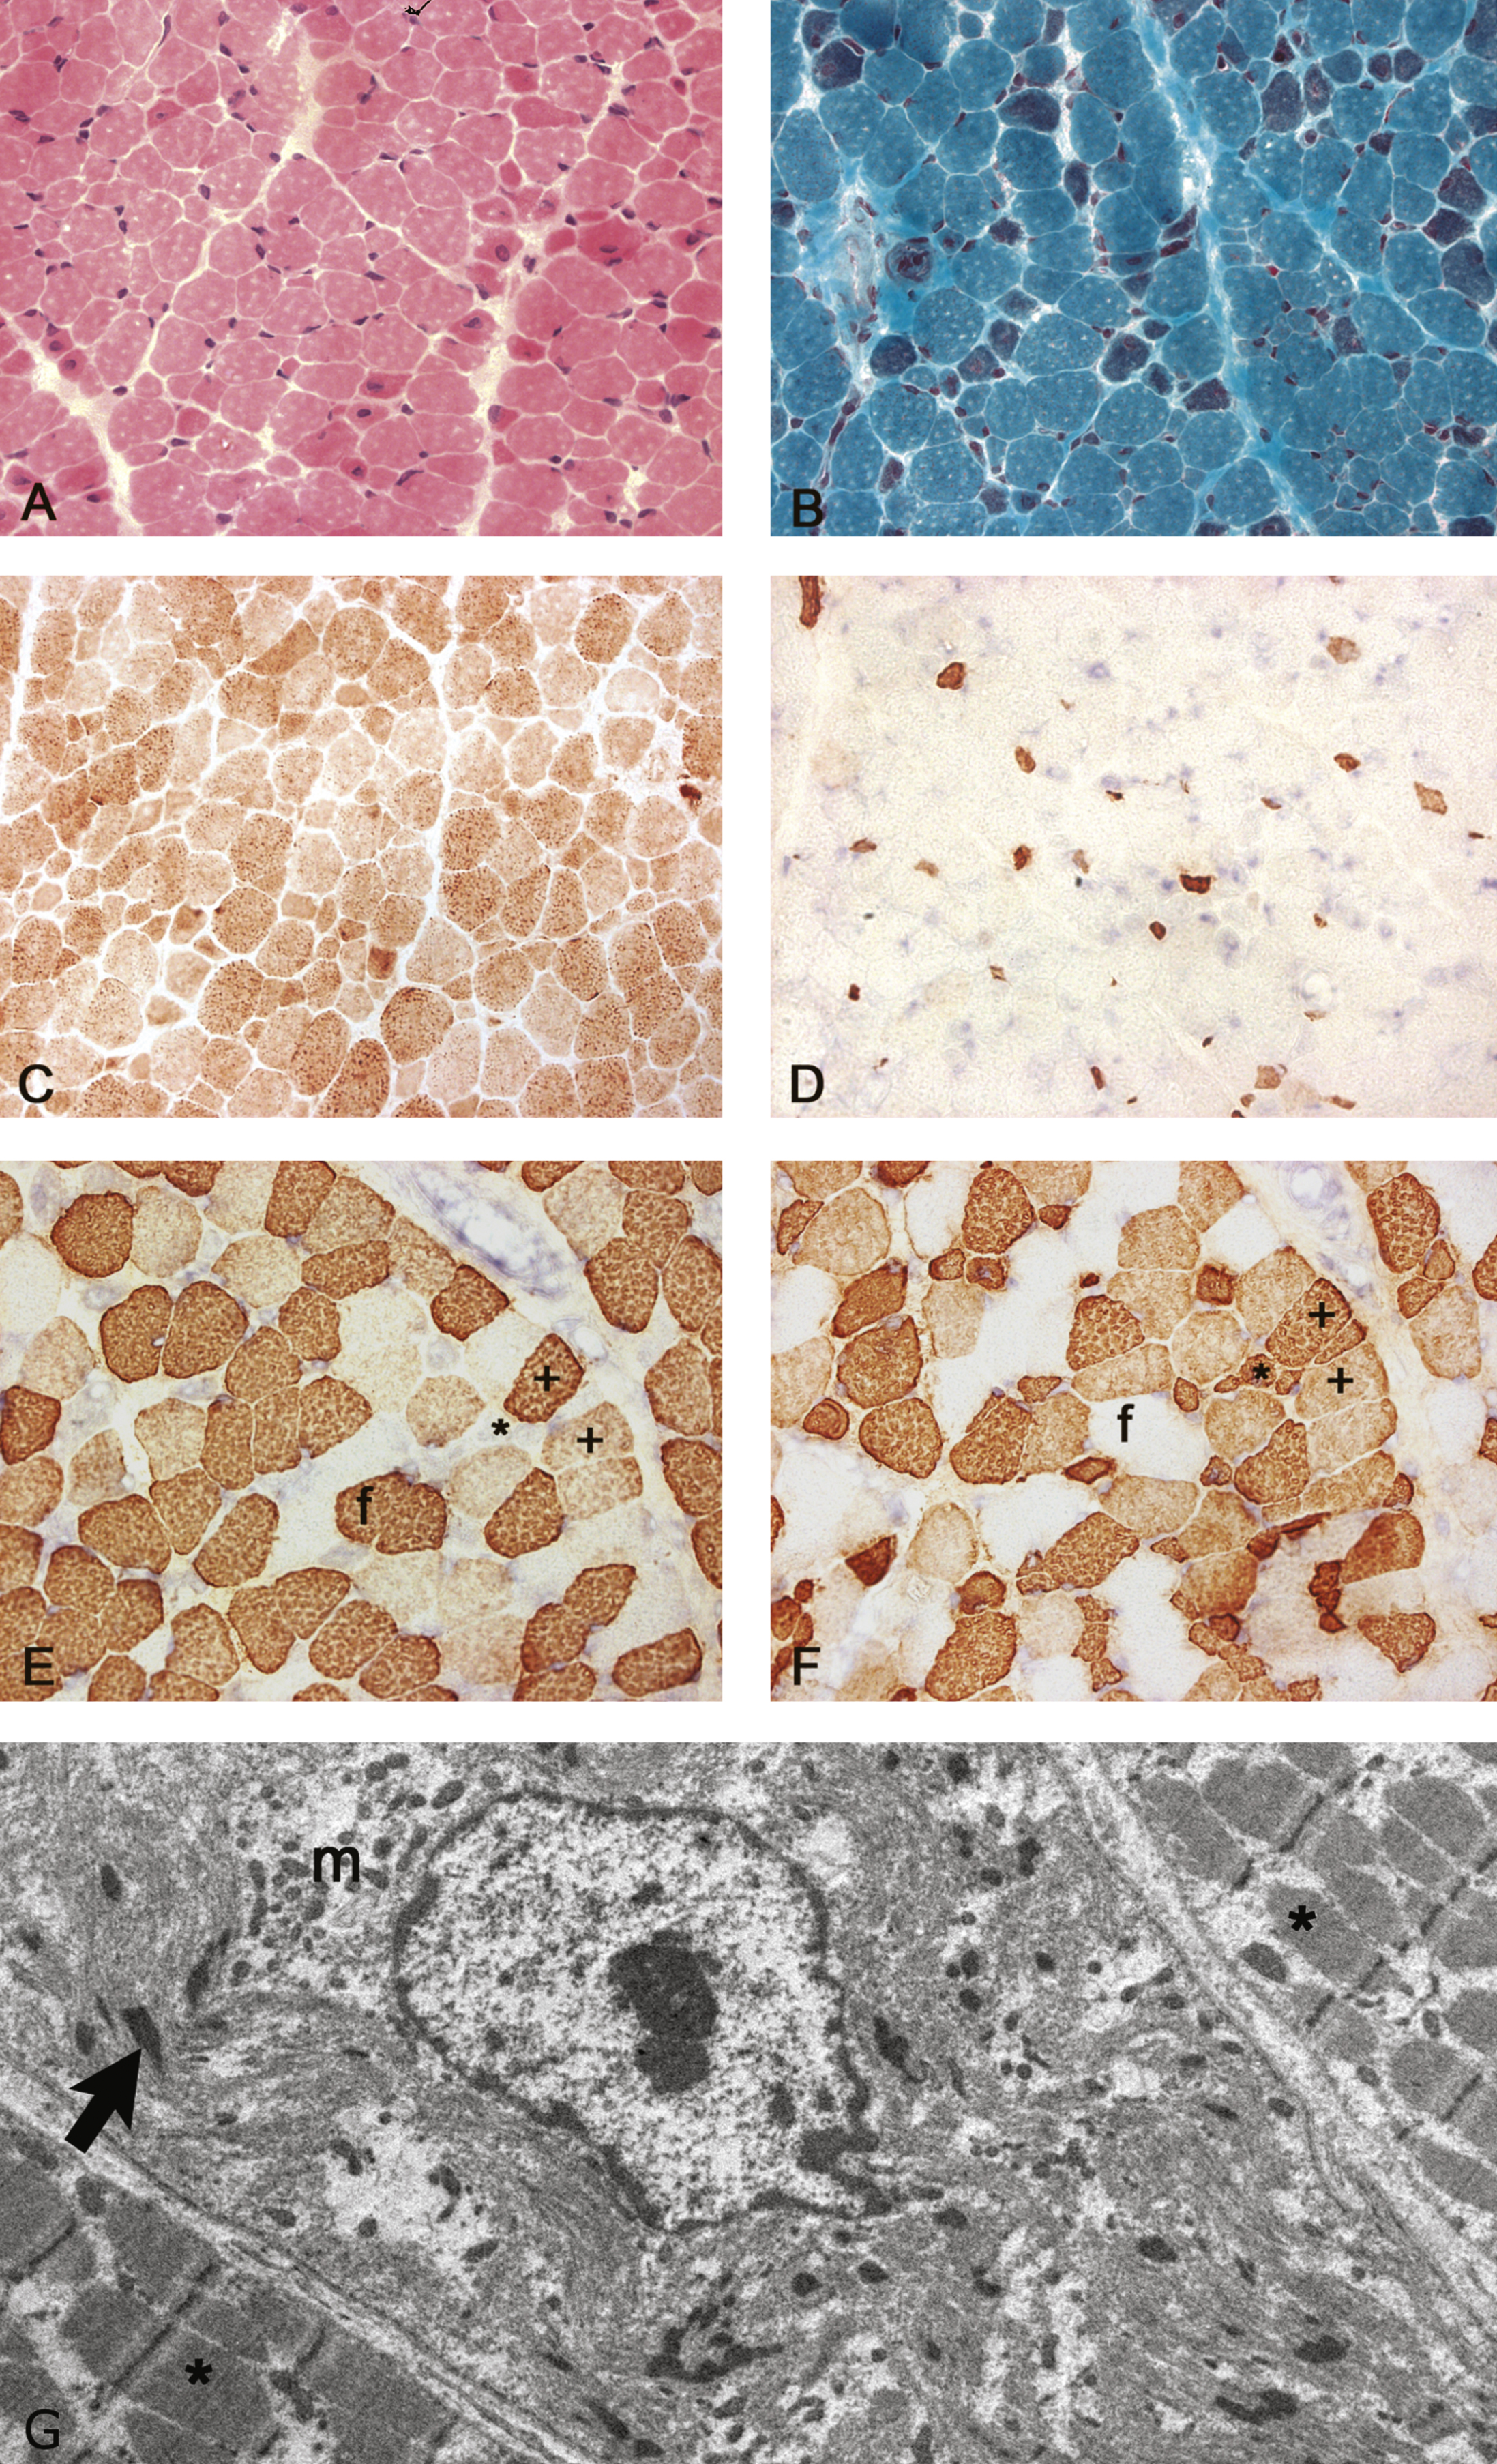 Histological stainings and immunolabelling of frozen sections and an electron micrograph of the muscle biopsy from the Proband. A) Haematoxylin and eosin staining showing a wide variation in fibre size with internal nuclei in several small fibres. Excess endomysial connective tissue or necrosis were not detected. B) Gömöri trichrome staining showing a population of small fibres containing red stained rods. C) Cytochrome C oxidase staining showing a population of darkly stained small type 1 fibres and some small weakly stained fibres. D) Immunolabelling with a monoclonal antibody to fetal myosin showing several very small positive fibres. E-F) Immunolabelling with monoclonal antibodies to fast (E) and slow (F) myosin heavy chains showing a population of small fibres that only express slow myosin (*), larger fibres that express fast (f) and several hybrid fibres with varying intensity that express both fast and slow myosin (+). G) Electron micrograph showing a fibre with severely disrupted myofibrils, an internal nucleus, small rods (arrow) and clusters of mitochondria (m), and less severely affected fibres either side (*) without rods.